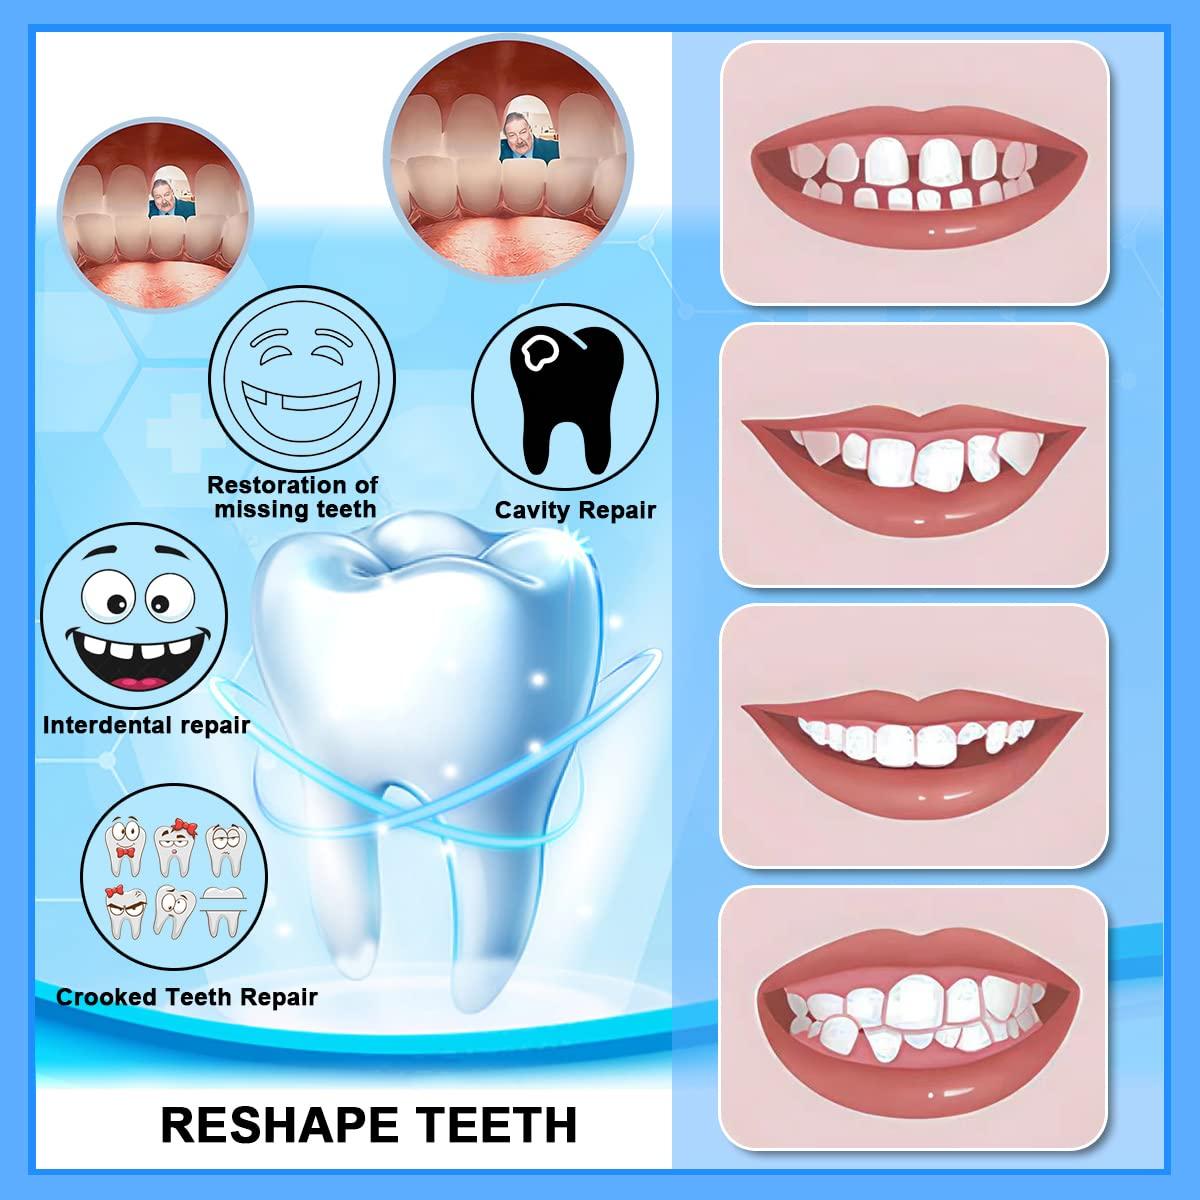 Tooth Repair Kit Includes 3 Moldable Denture Option That Can